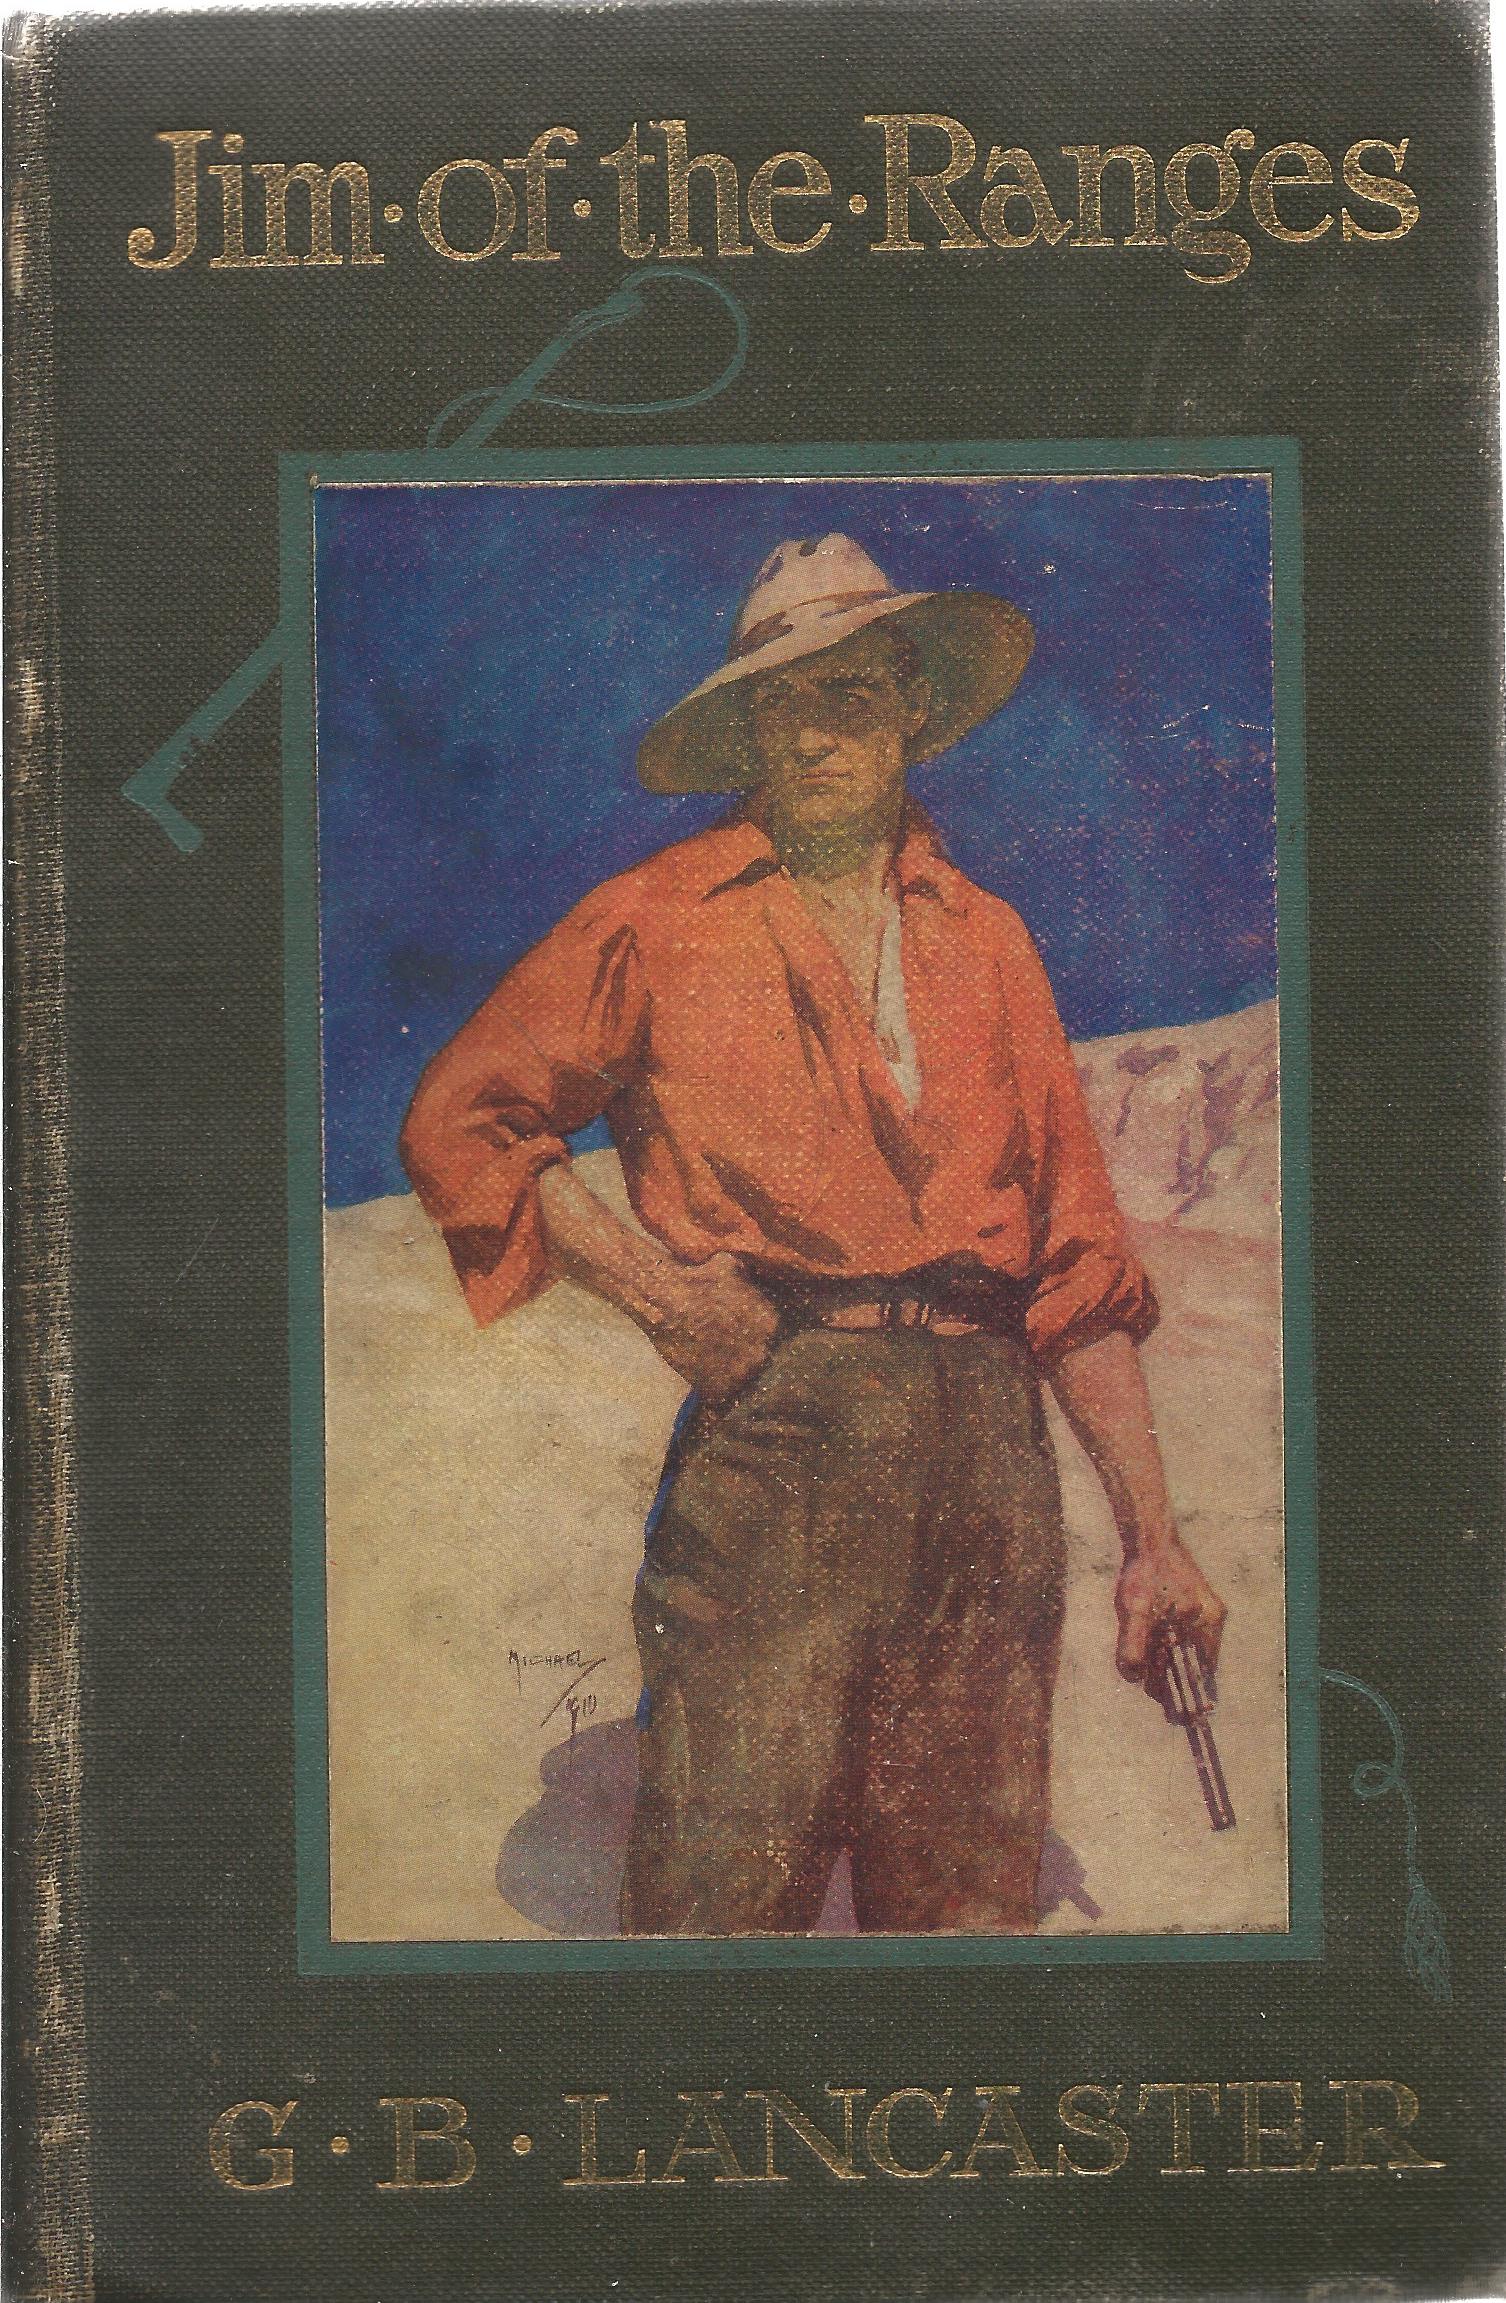 Jim of the Ranges by G B Lancaster 1910 Hardback Book published by Constable and Co Ltd some